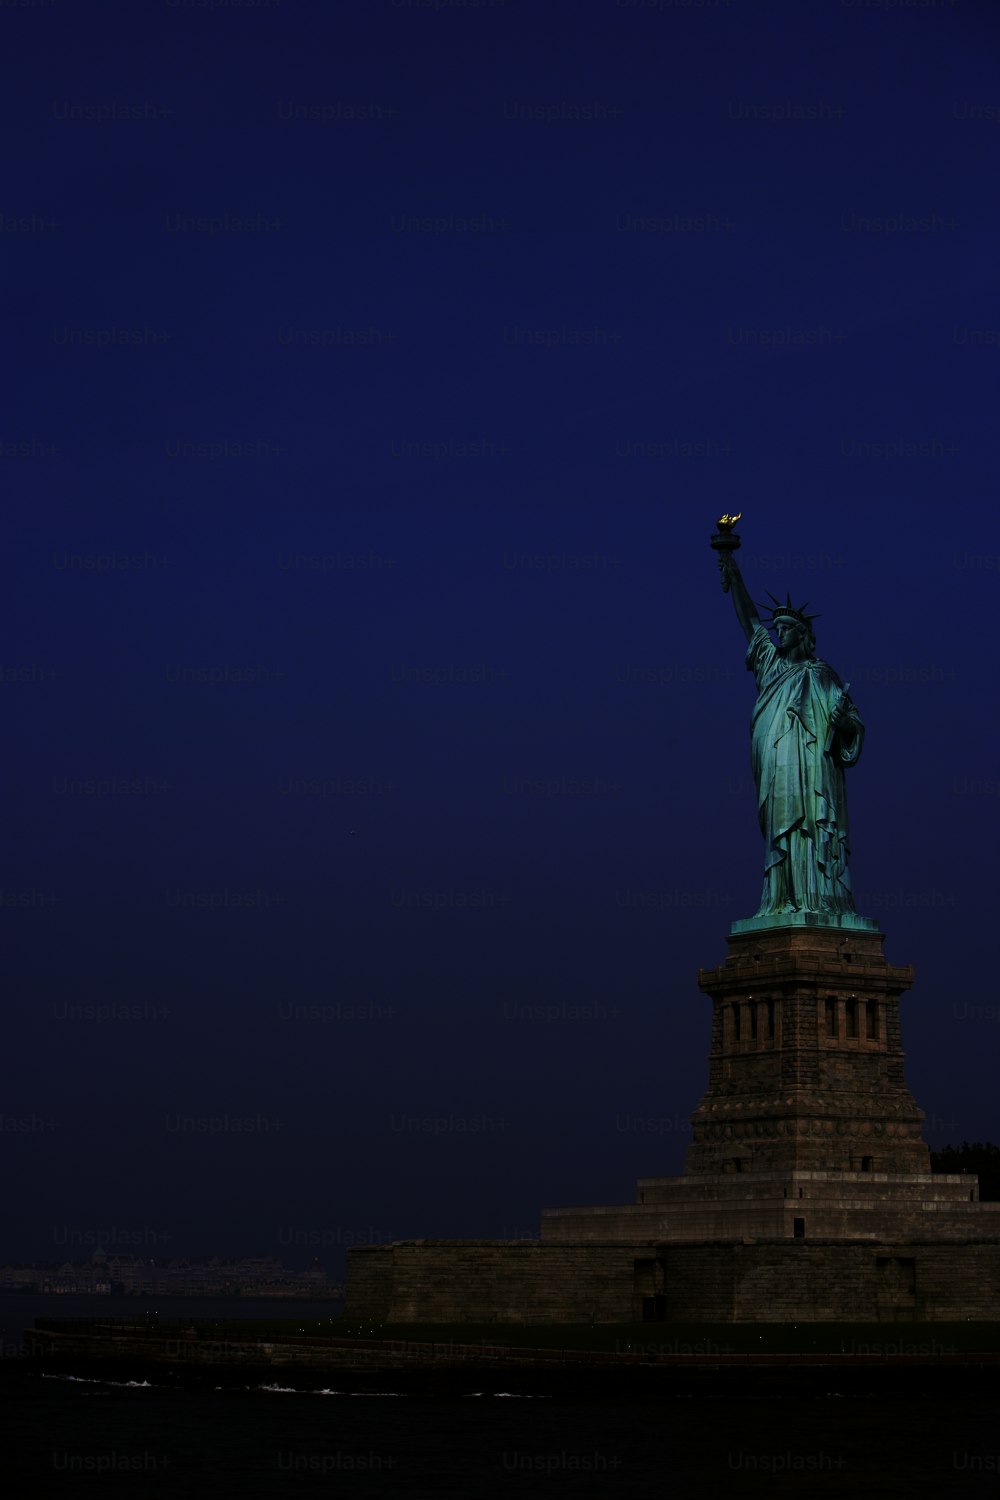 the statue of liberty stands on the edge of a body of water